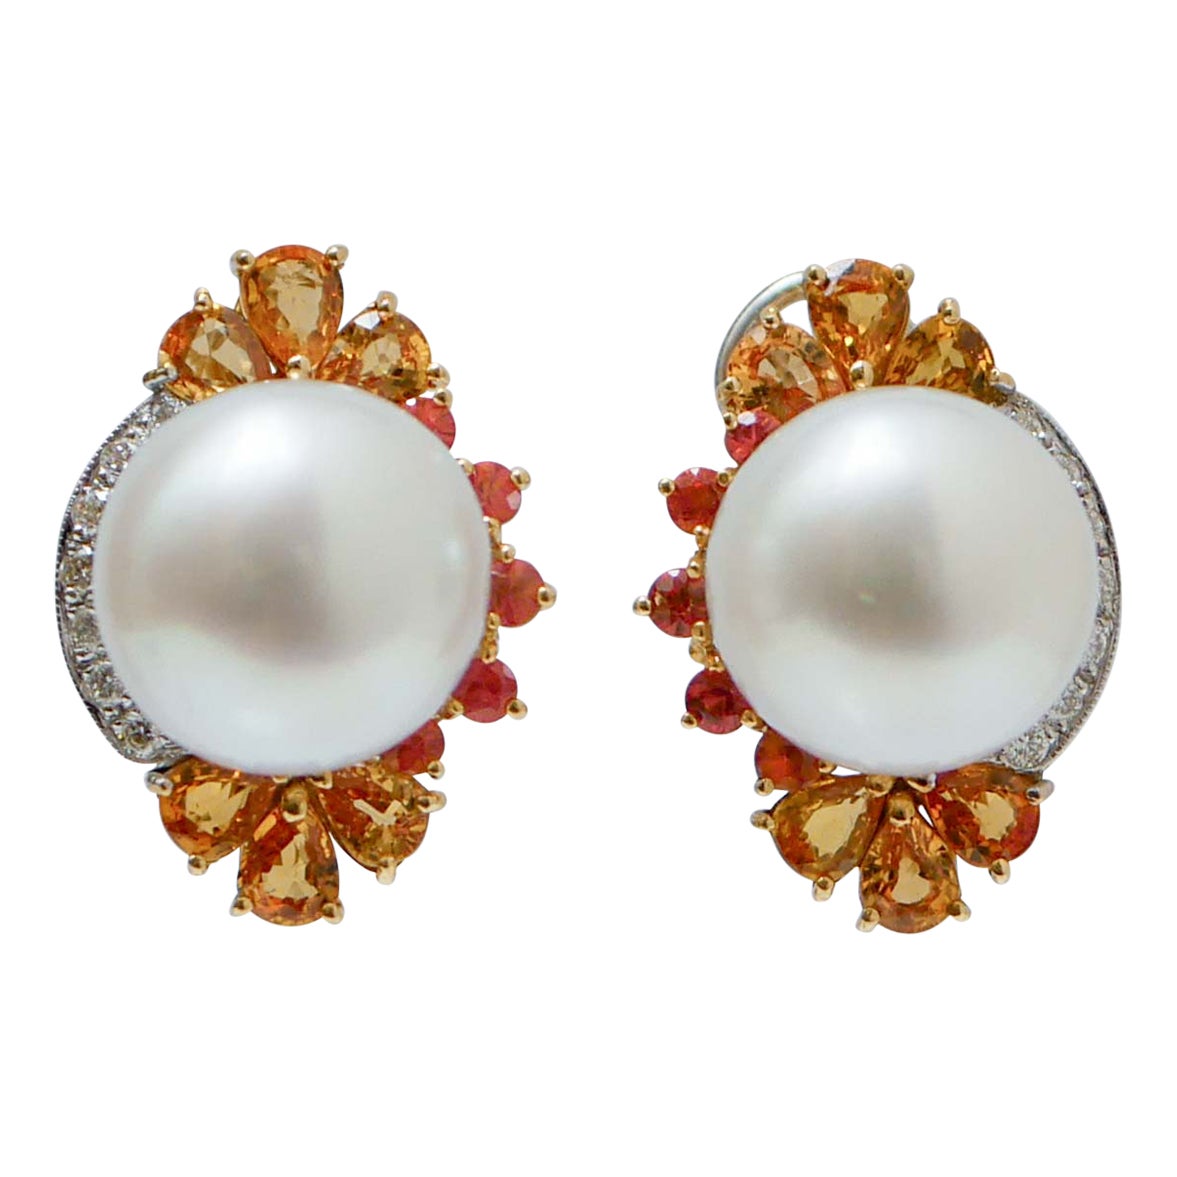 South-Sea Pearls, Sapphires, Diamonds, 18 KtWhite Gold and Yellow Gold Earrings.